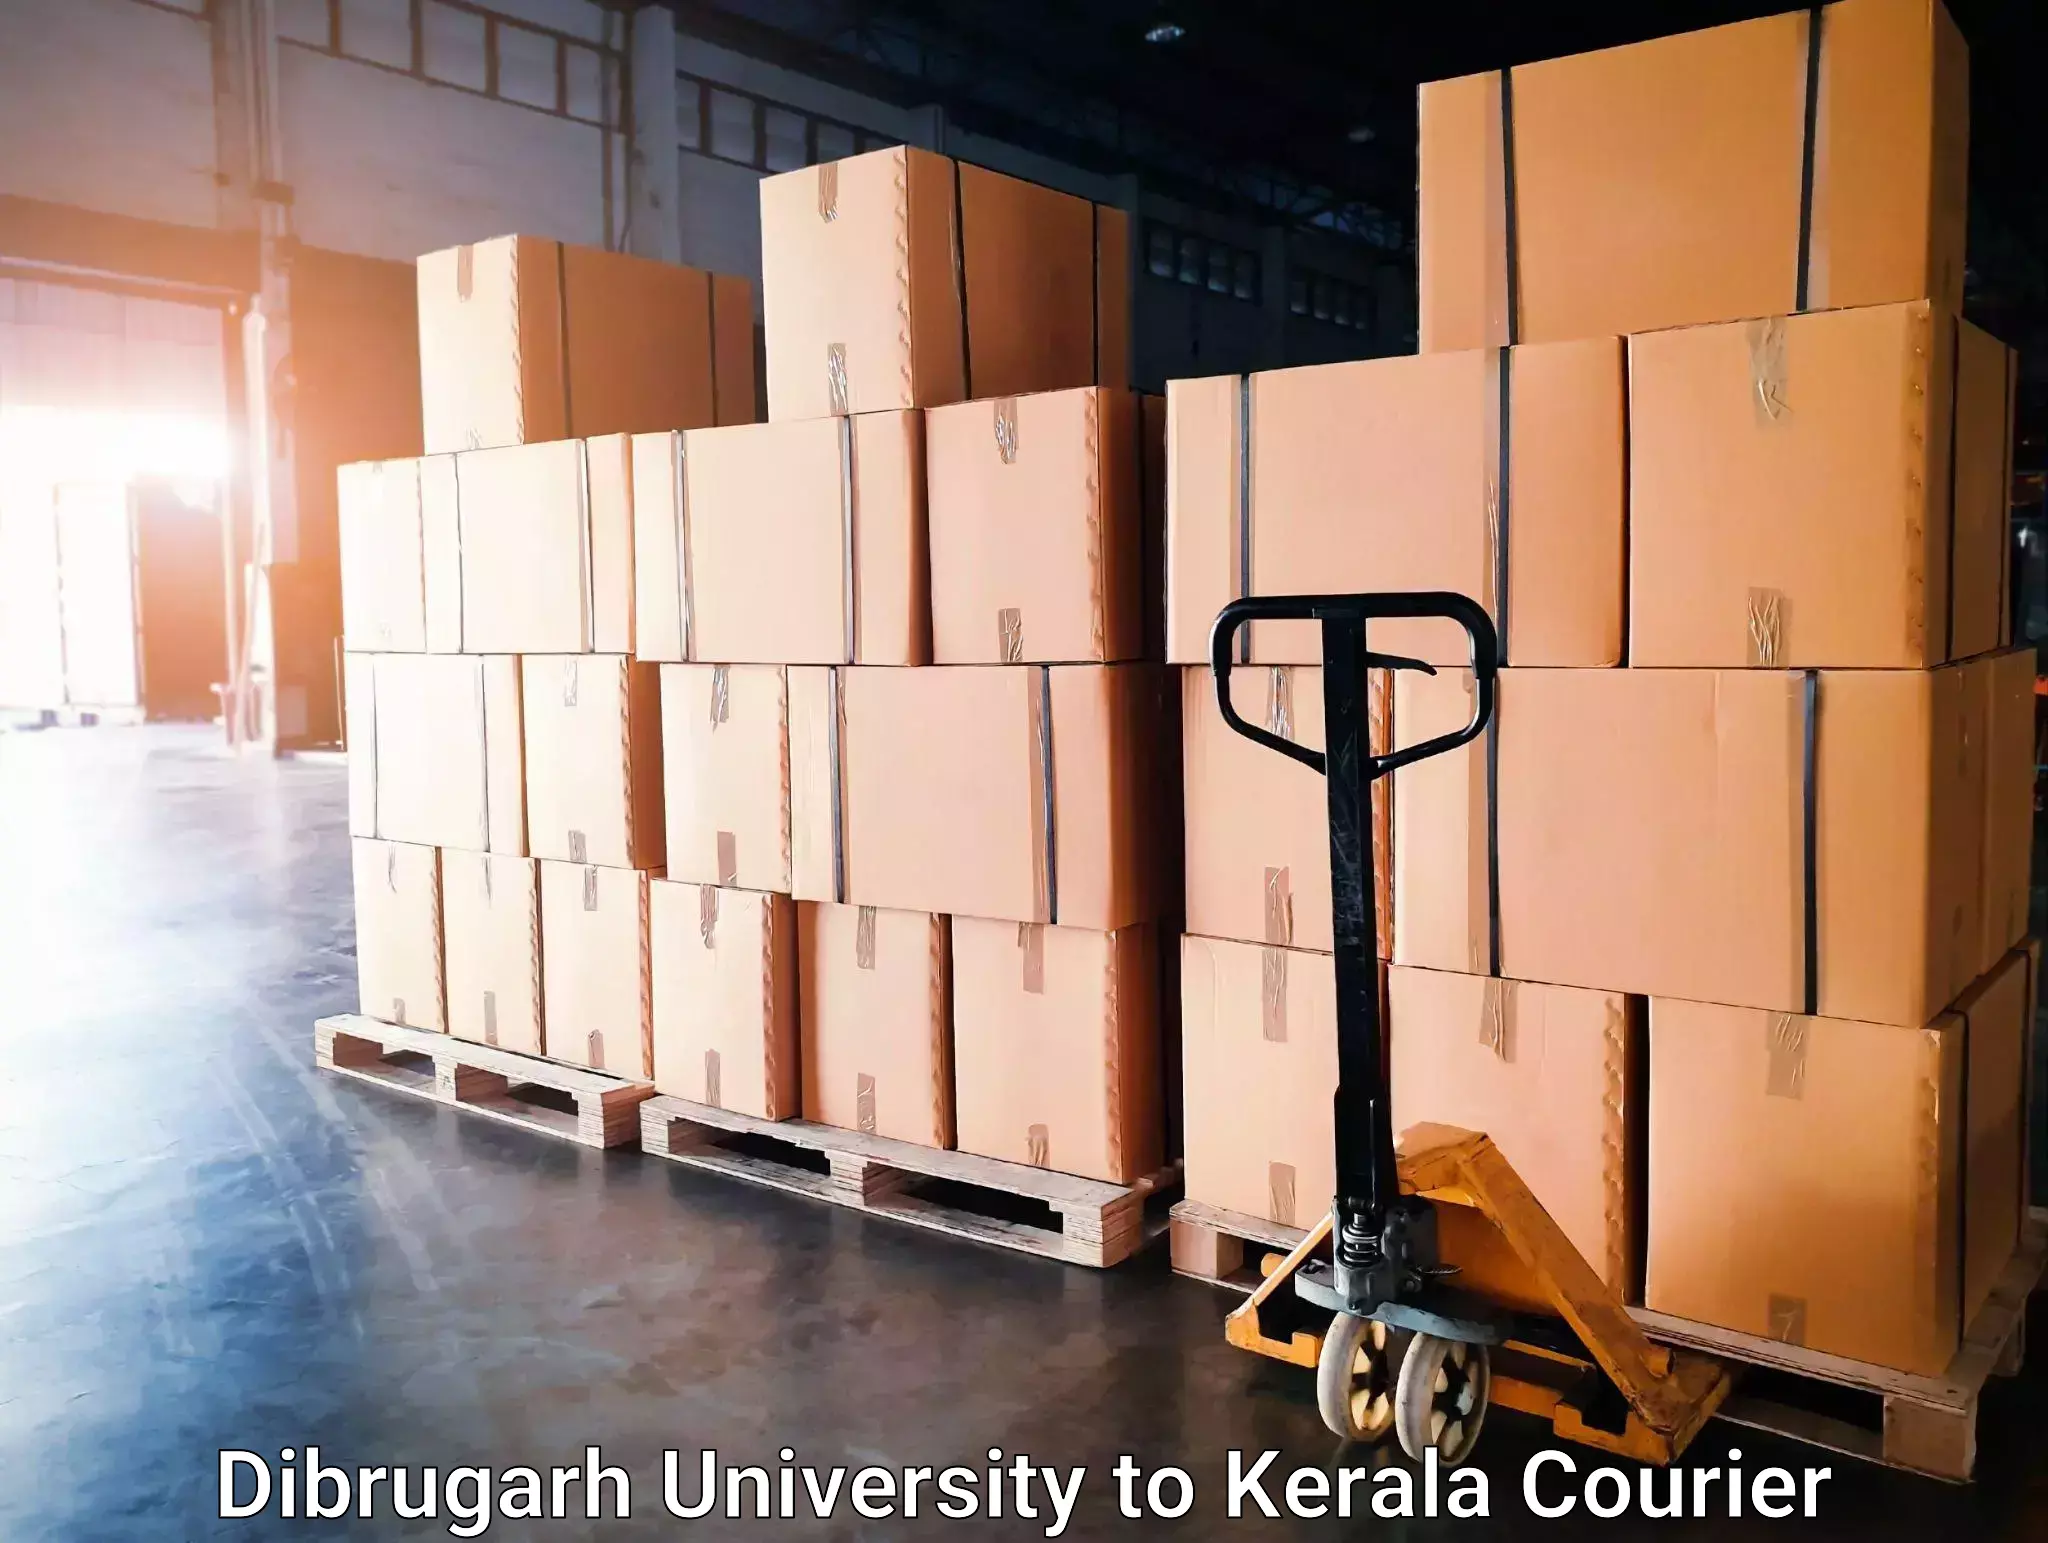 Tailored freight services in Dibrugarh University to Cochin Port Kochi